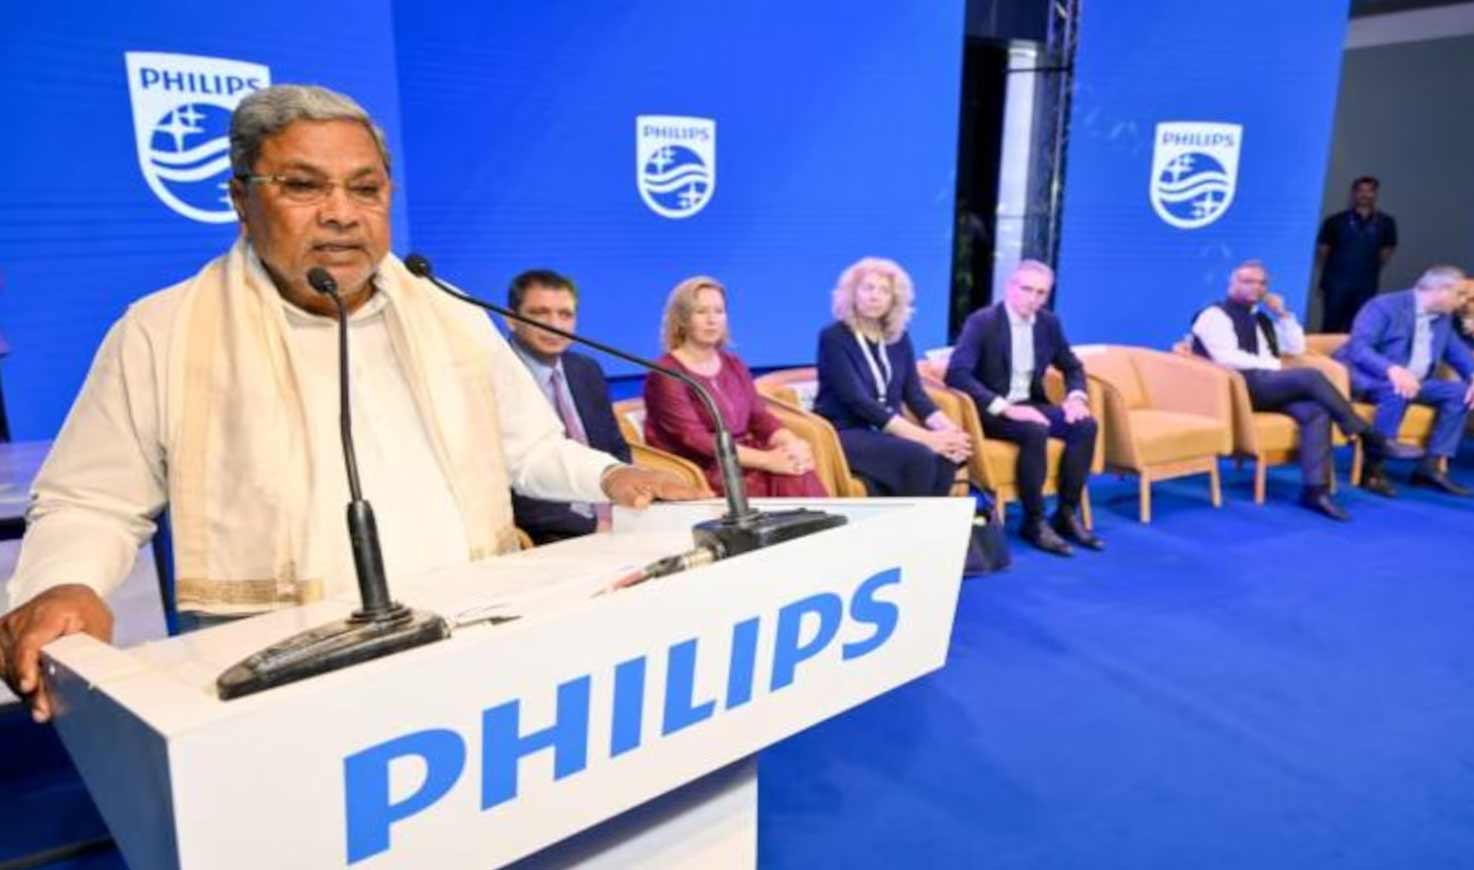 Philips launches innovation campus in Bengaluru with capacity for 5,000 professionals